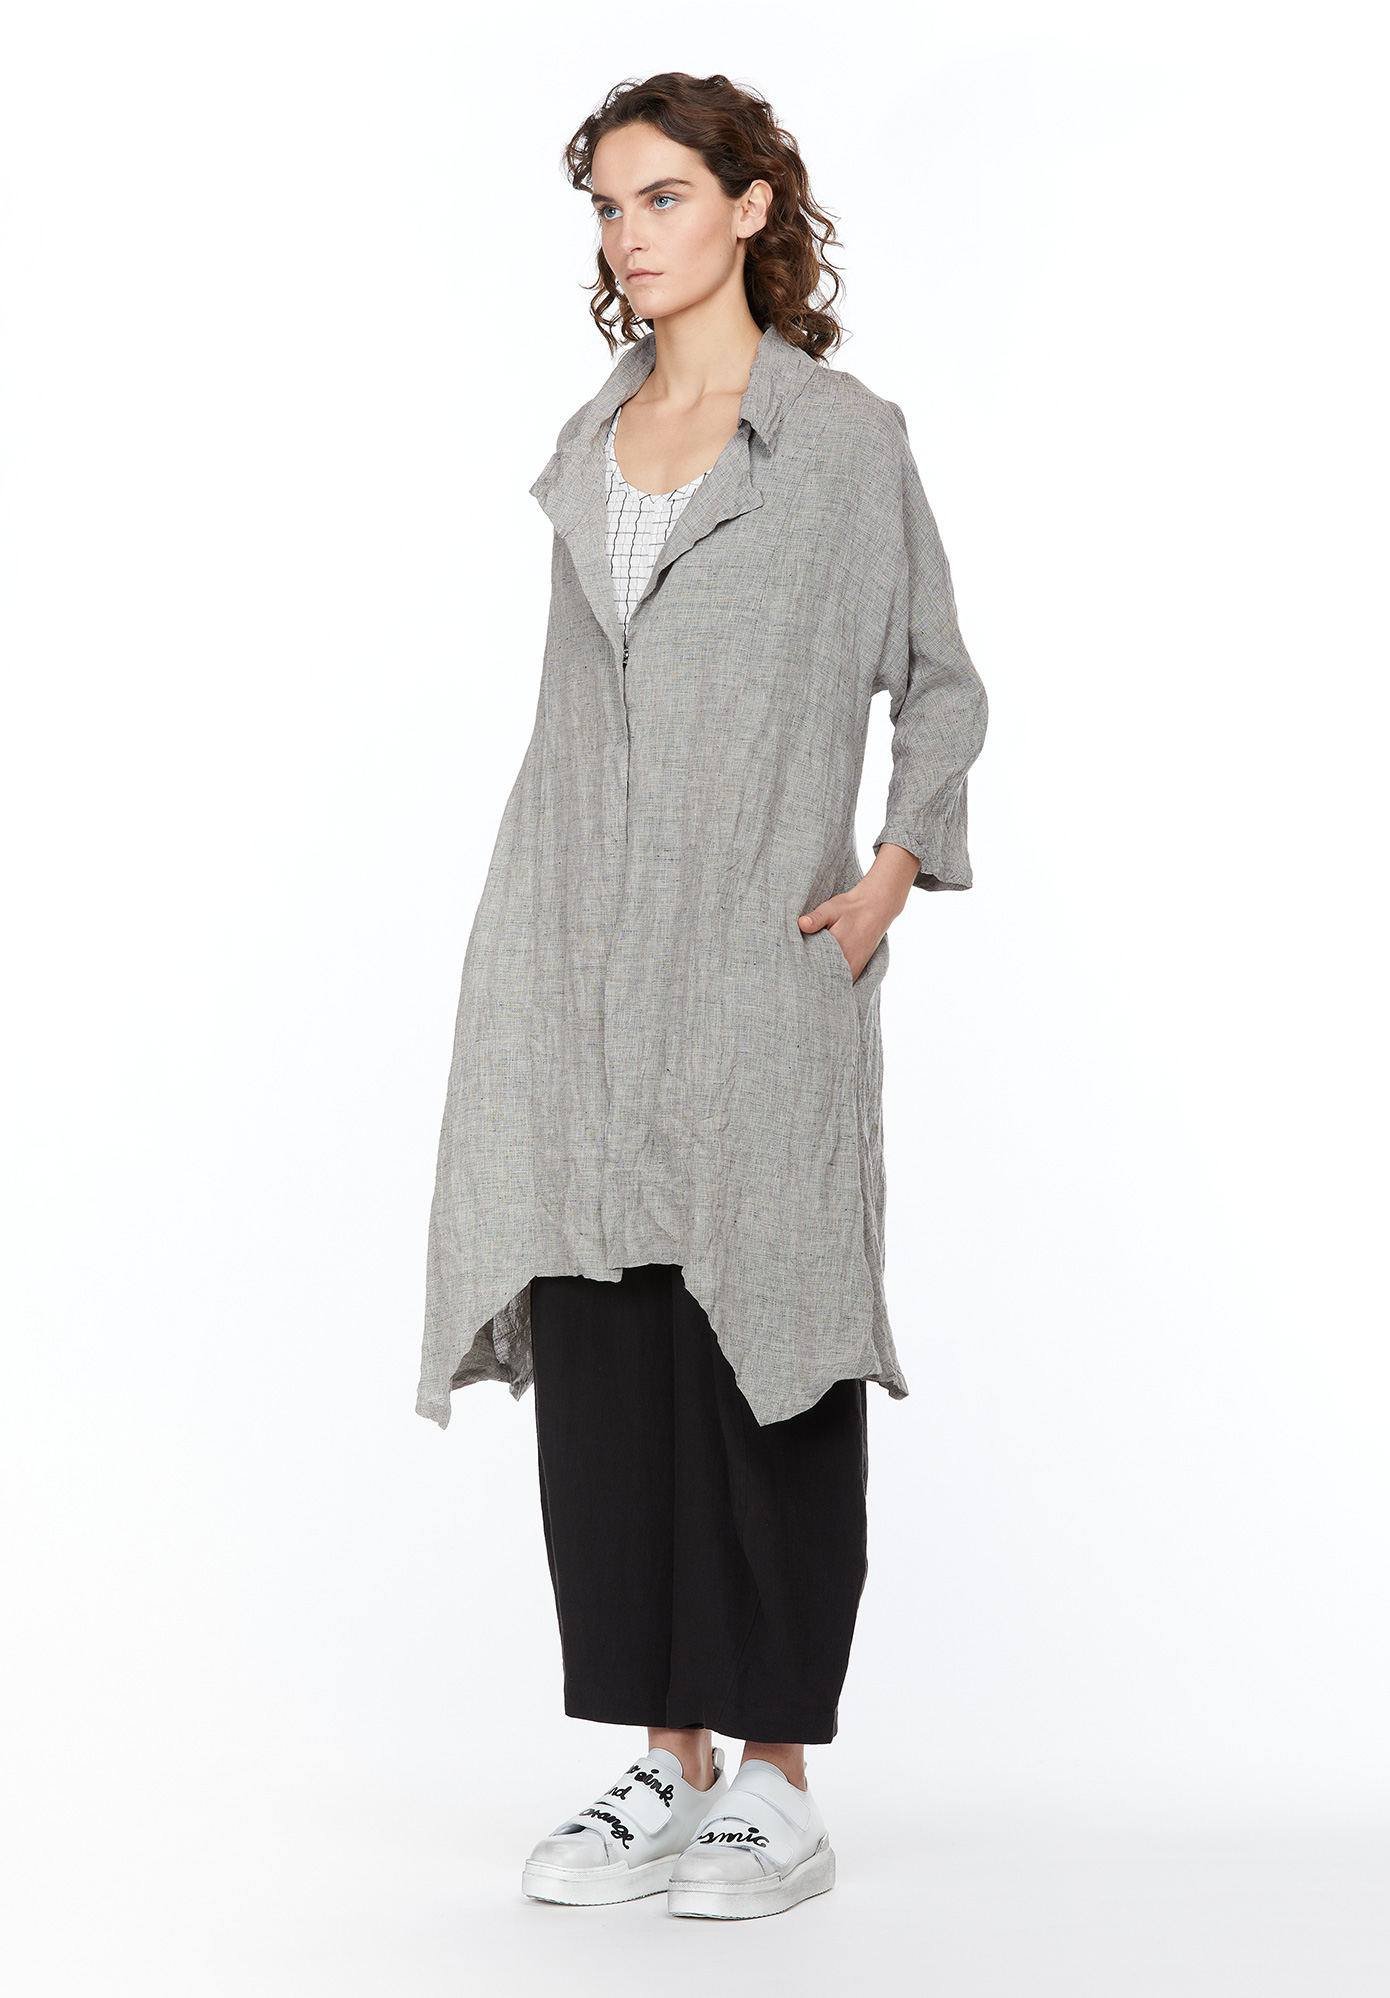 ASYMM DUSTER LONG - TAUPE / BLACK